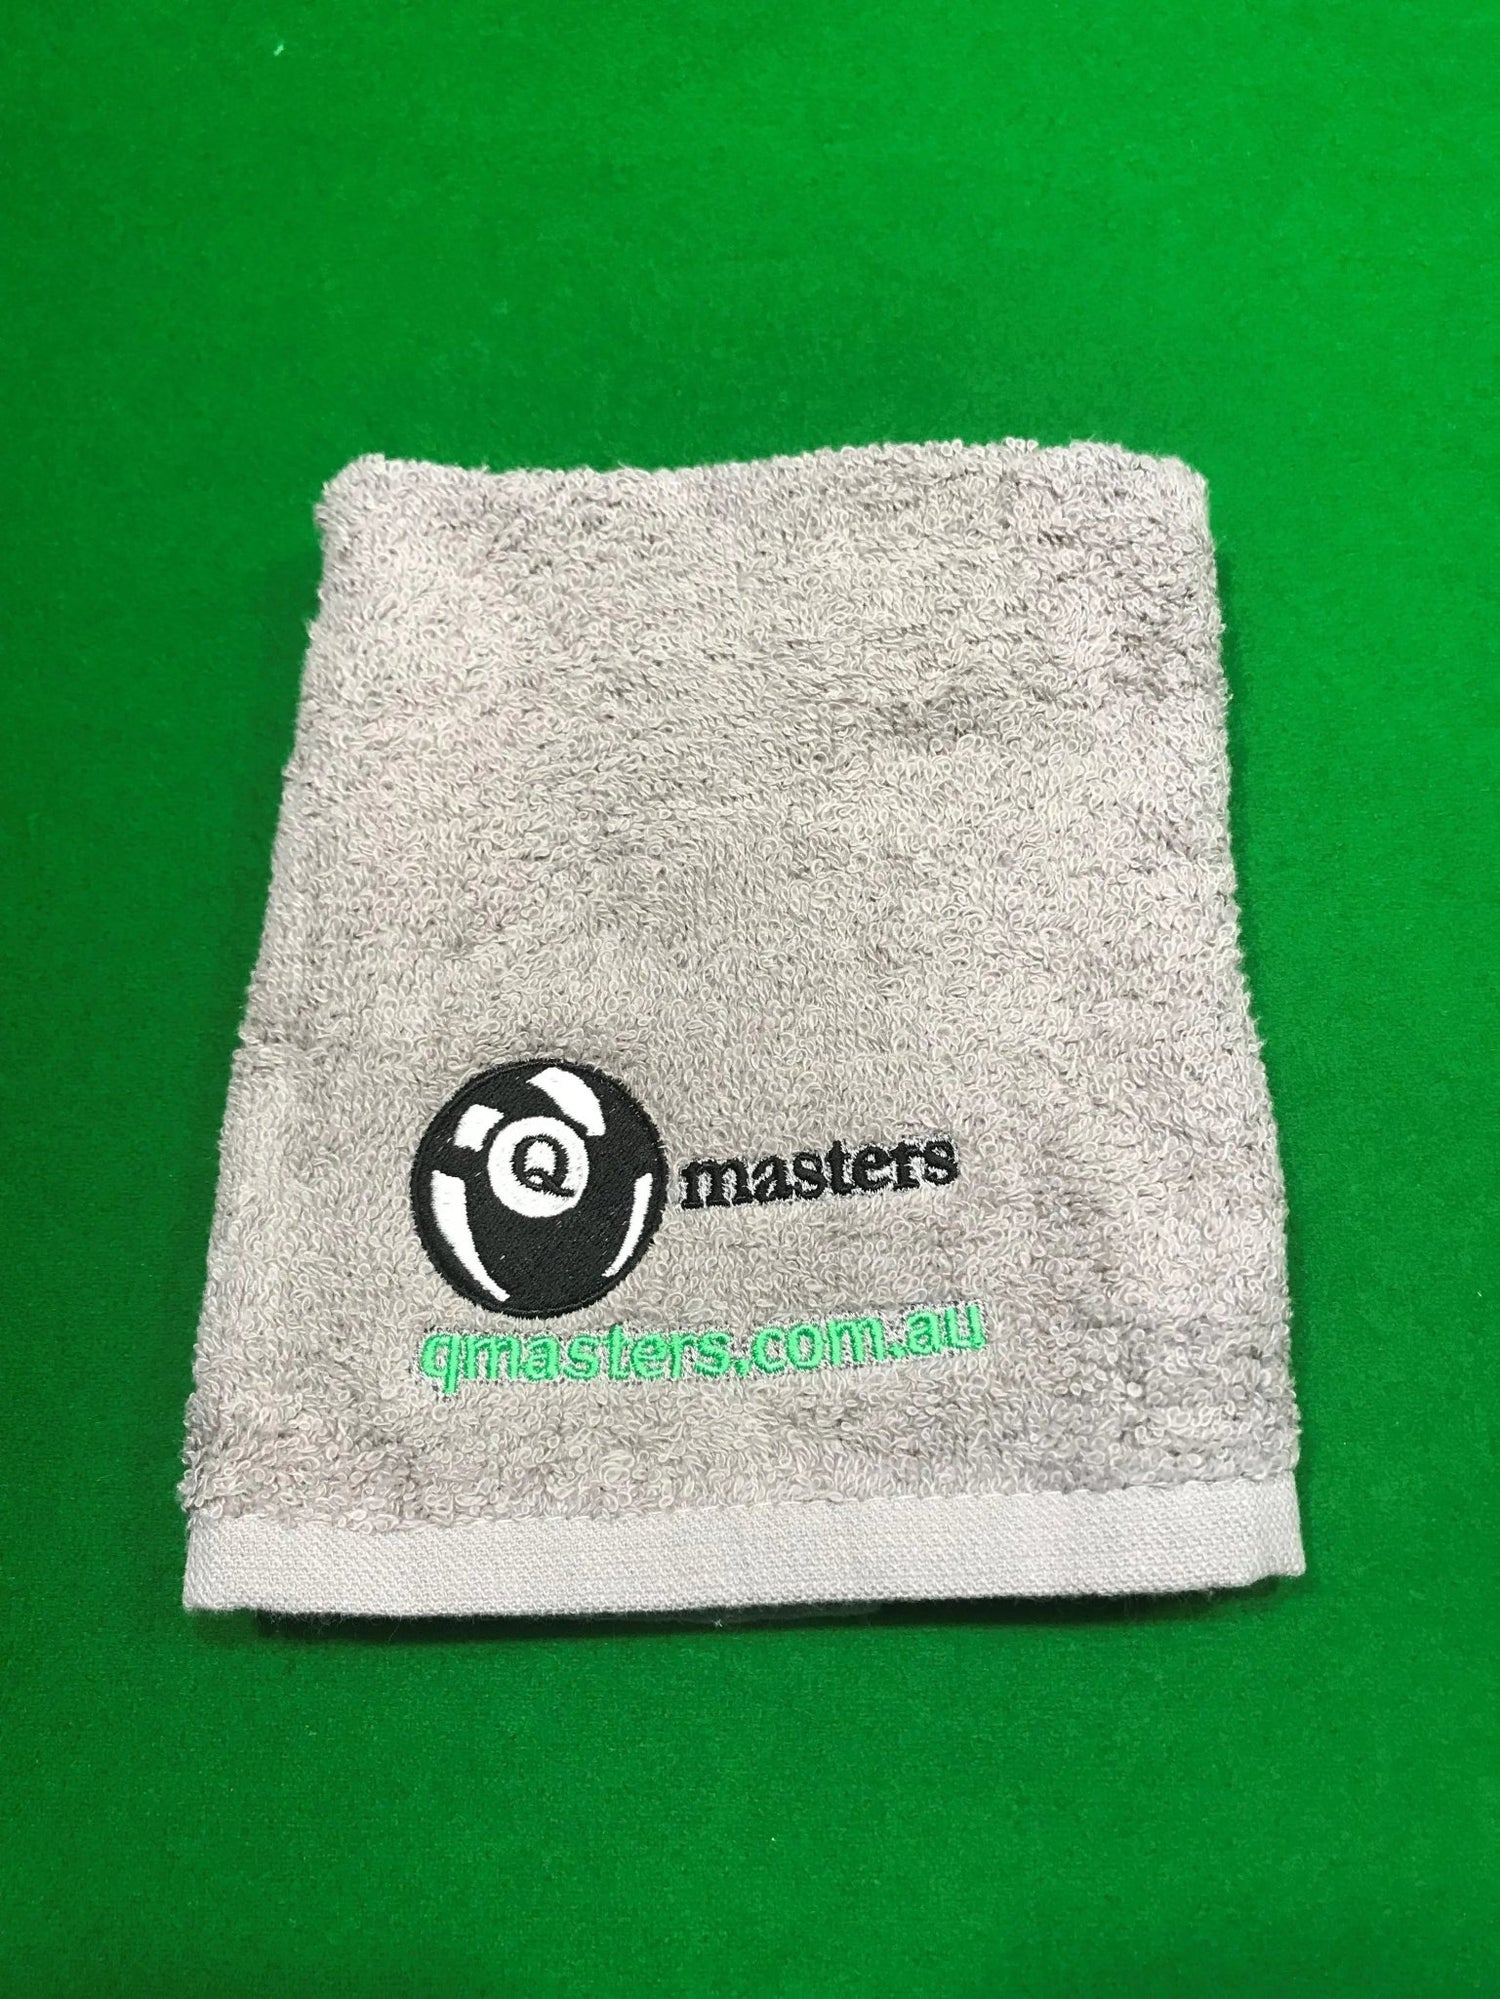 Q-Masters Embroidered Cue Sport Towel Grey - Q-Masters